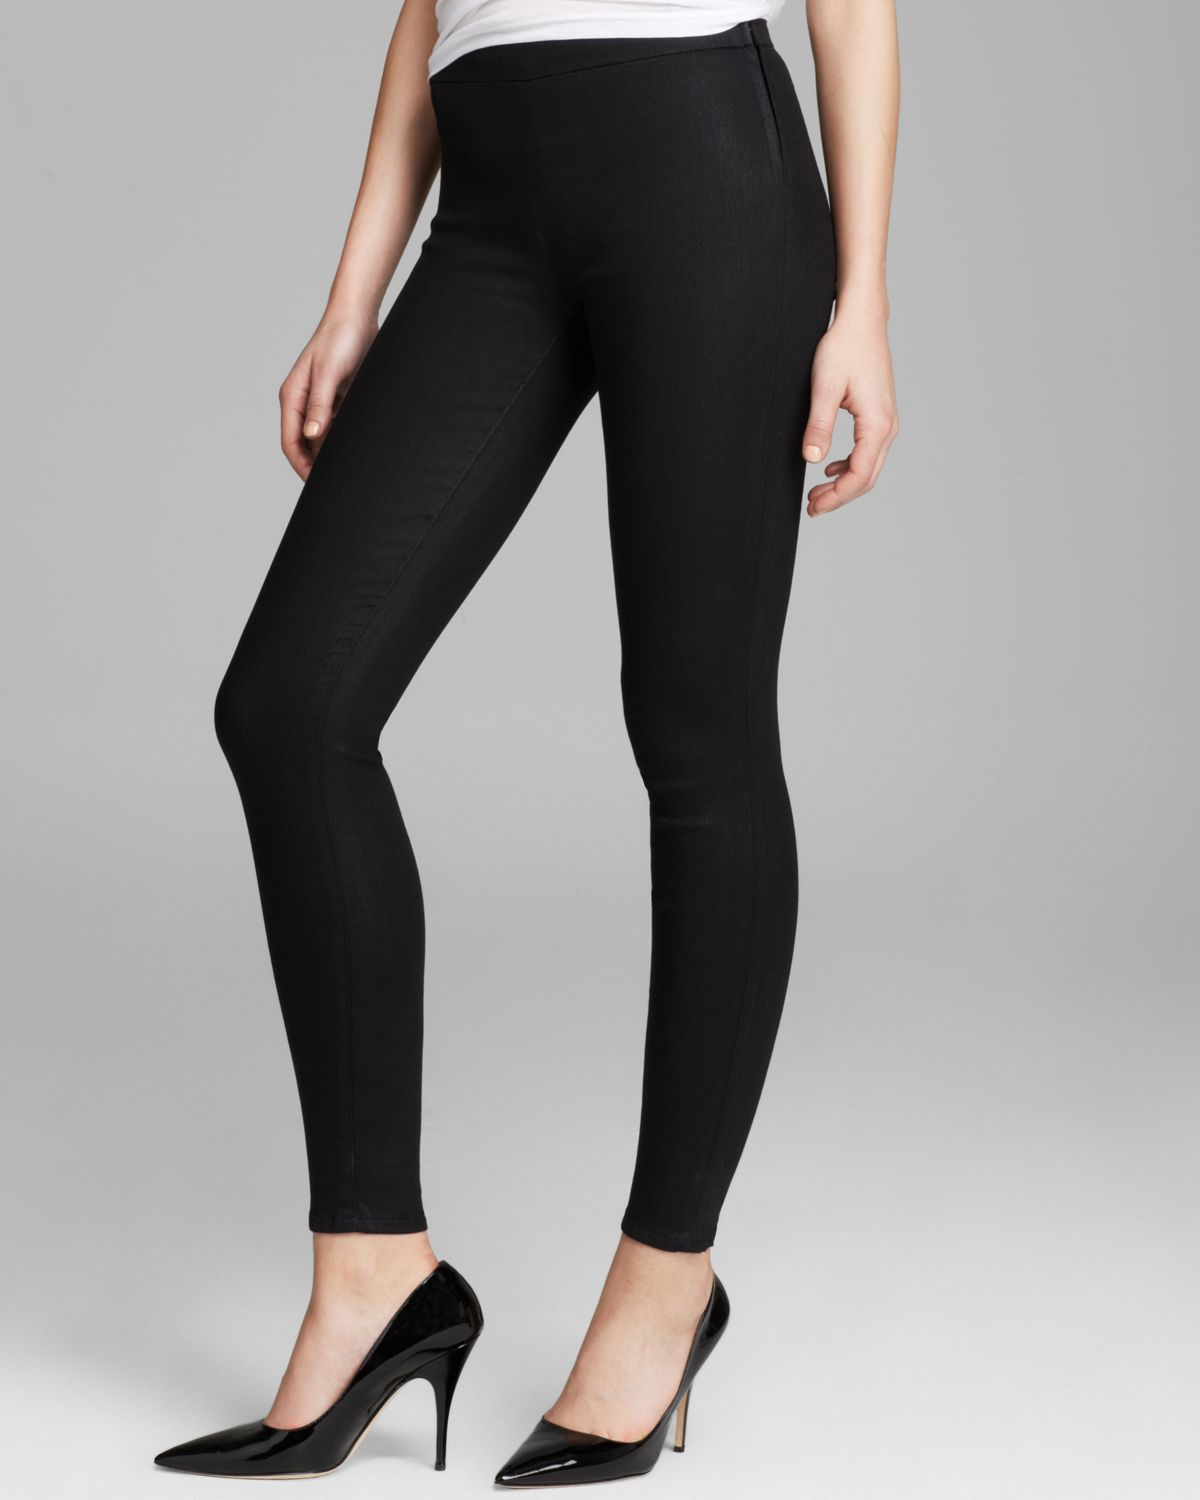 J Brand Stocking Jeans Coated Skinny in Fearless in Black (Fearless) | Lyst